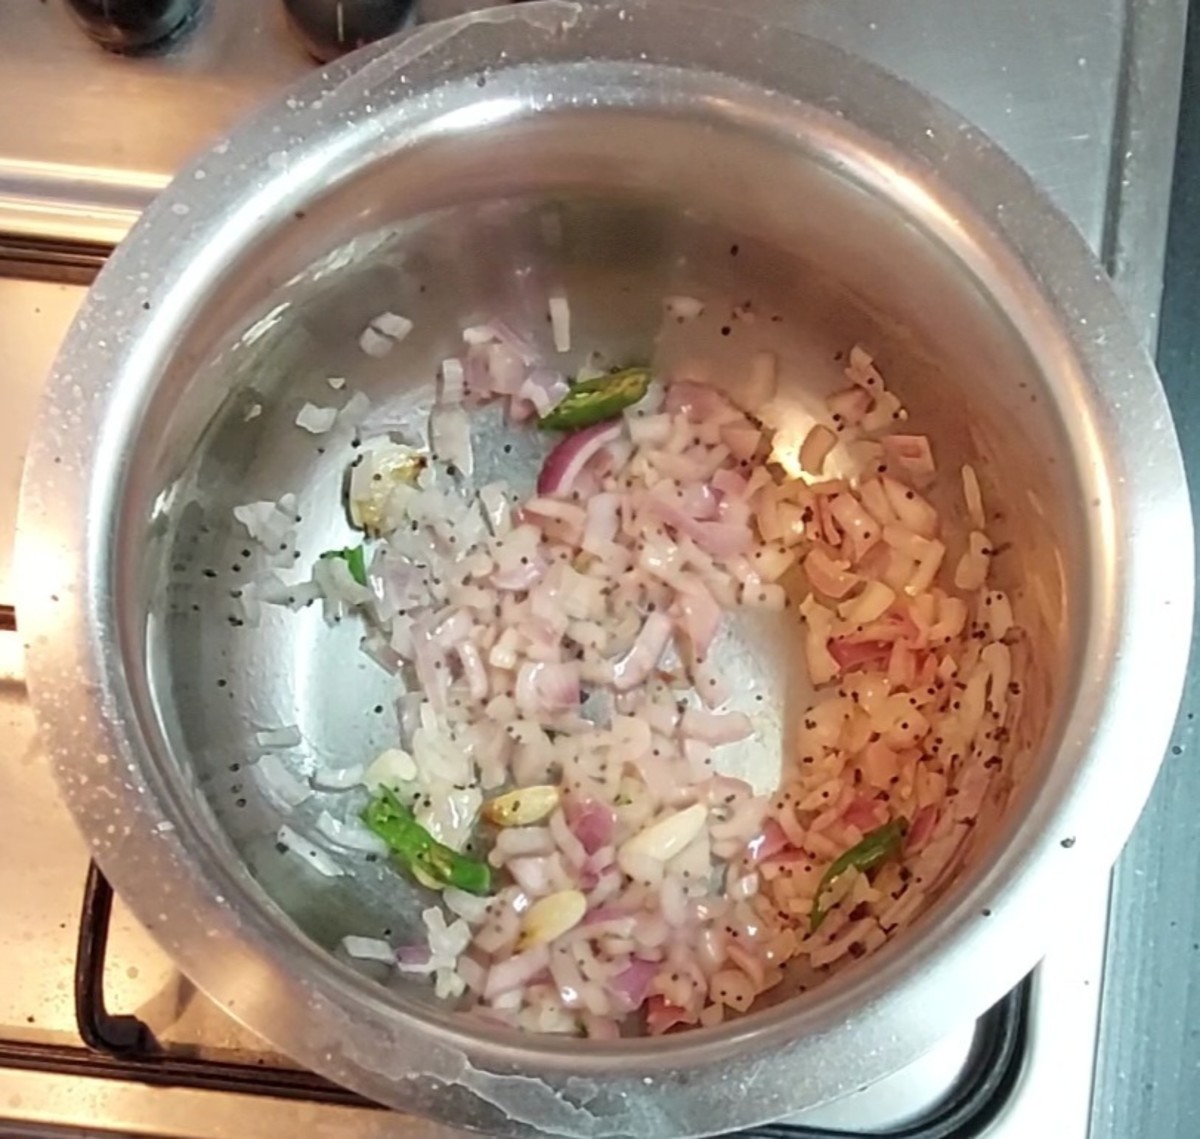 Add 1 cup chopped onion and 1-2 green chilies. Fry till onion turns translucent.